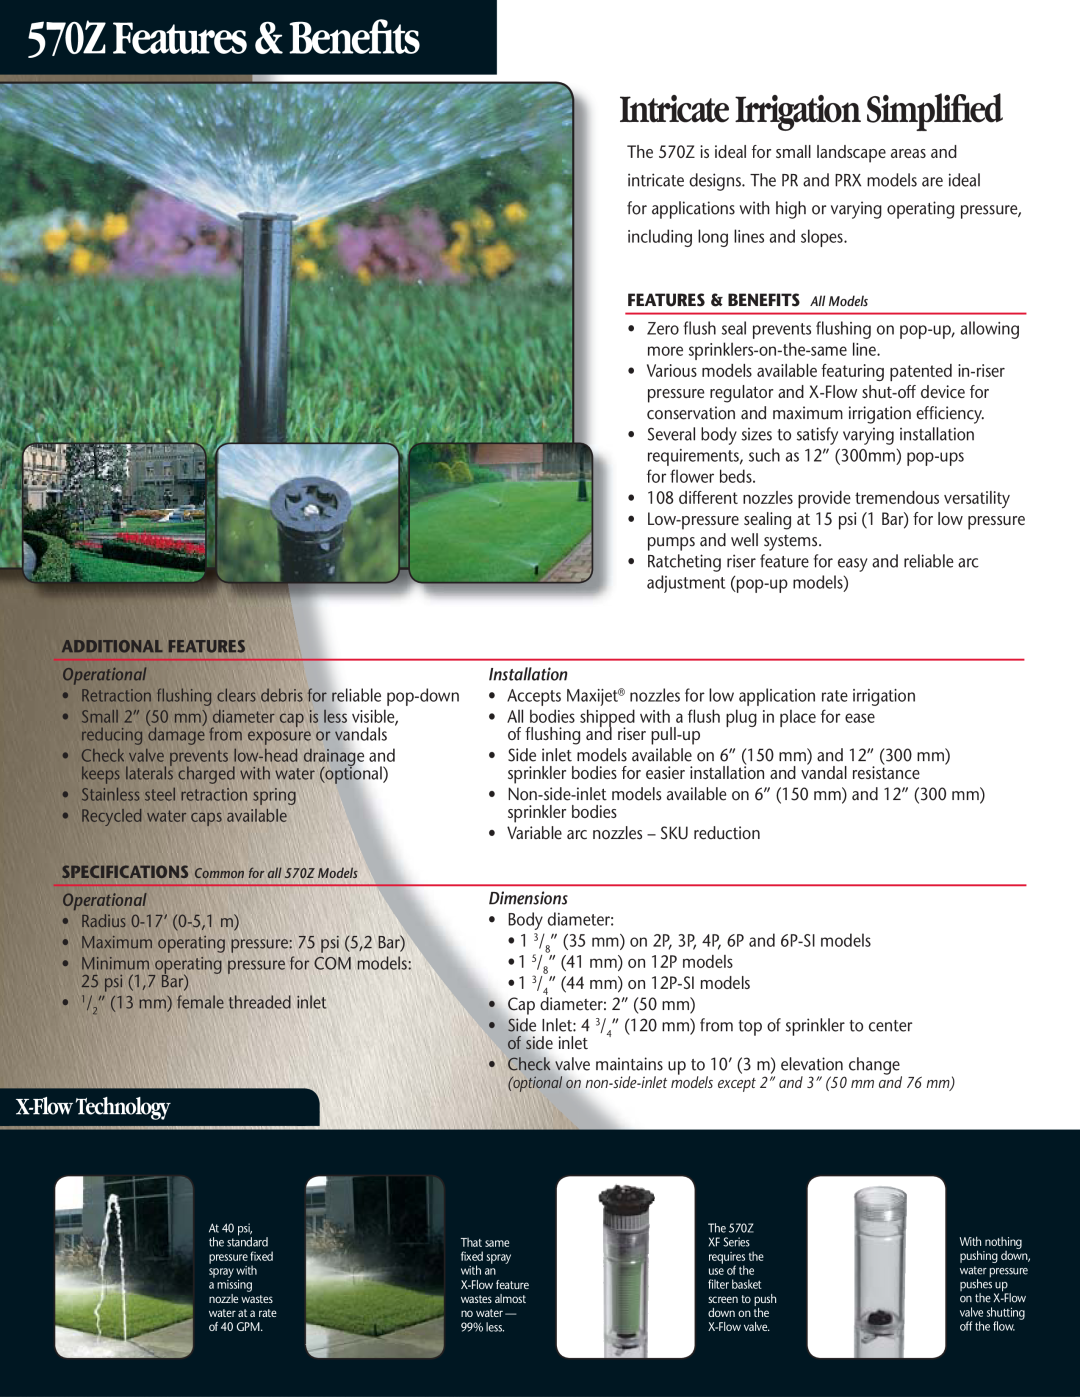 Toro manual X-Flow Technology, 570Z Features & Beneﬁts, Intricate Irrigation Simpliﬁed, FEATURES & BENEFITS All Models 